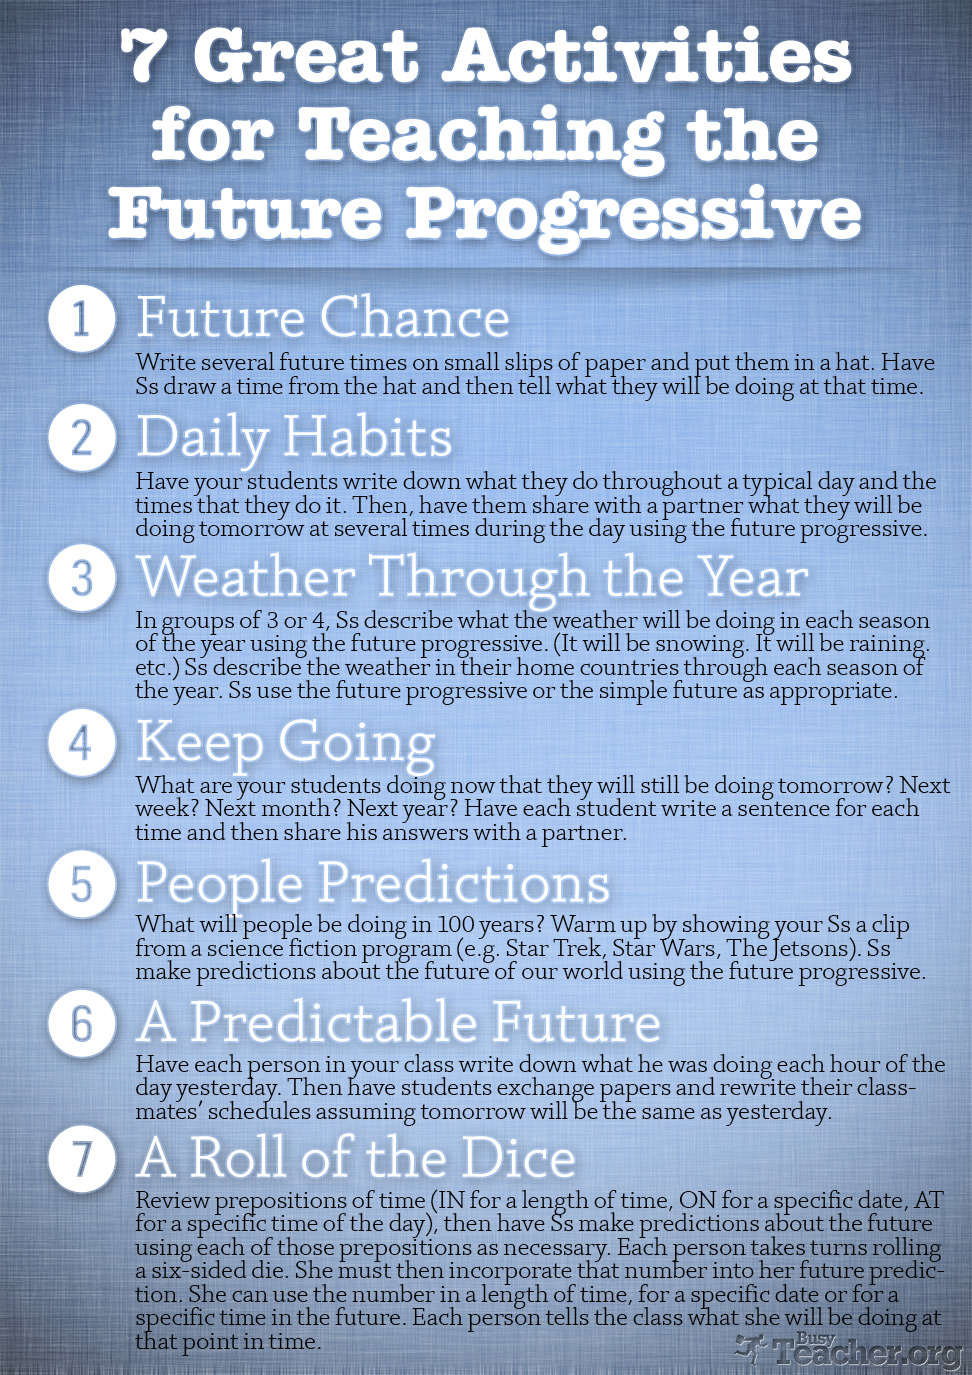 7 Great Activities to Teach the Future Progressive: Poster